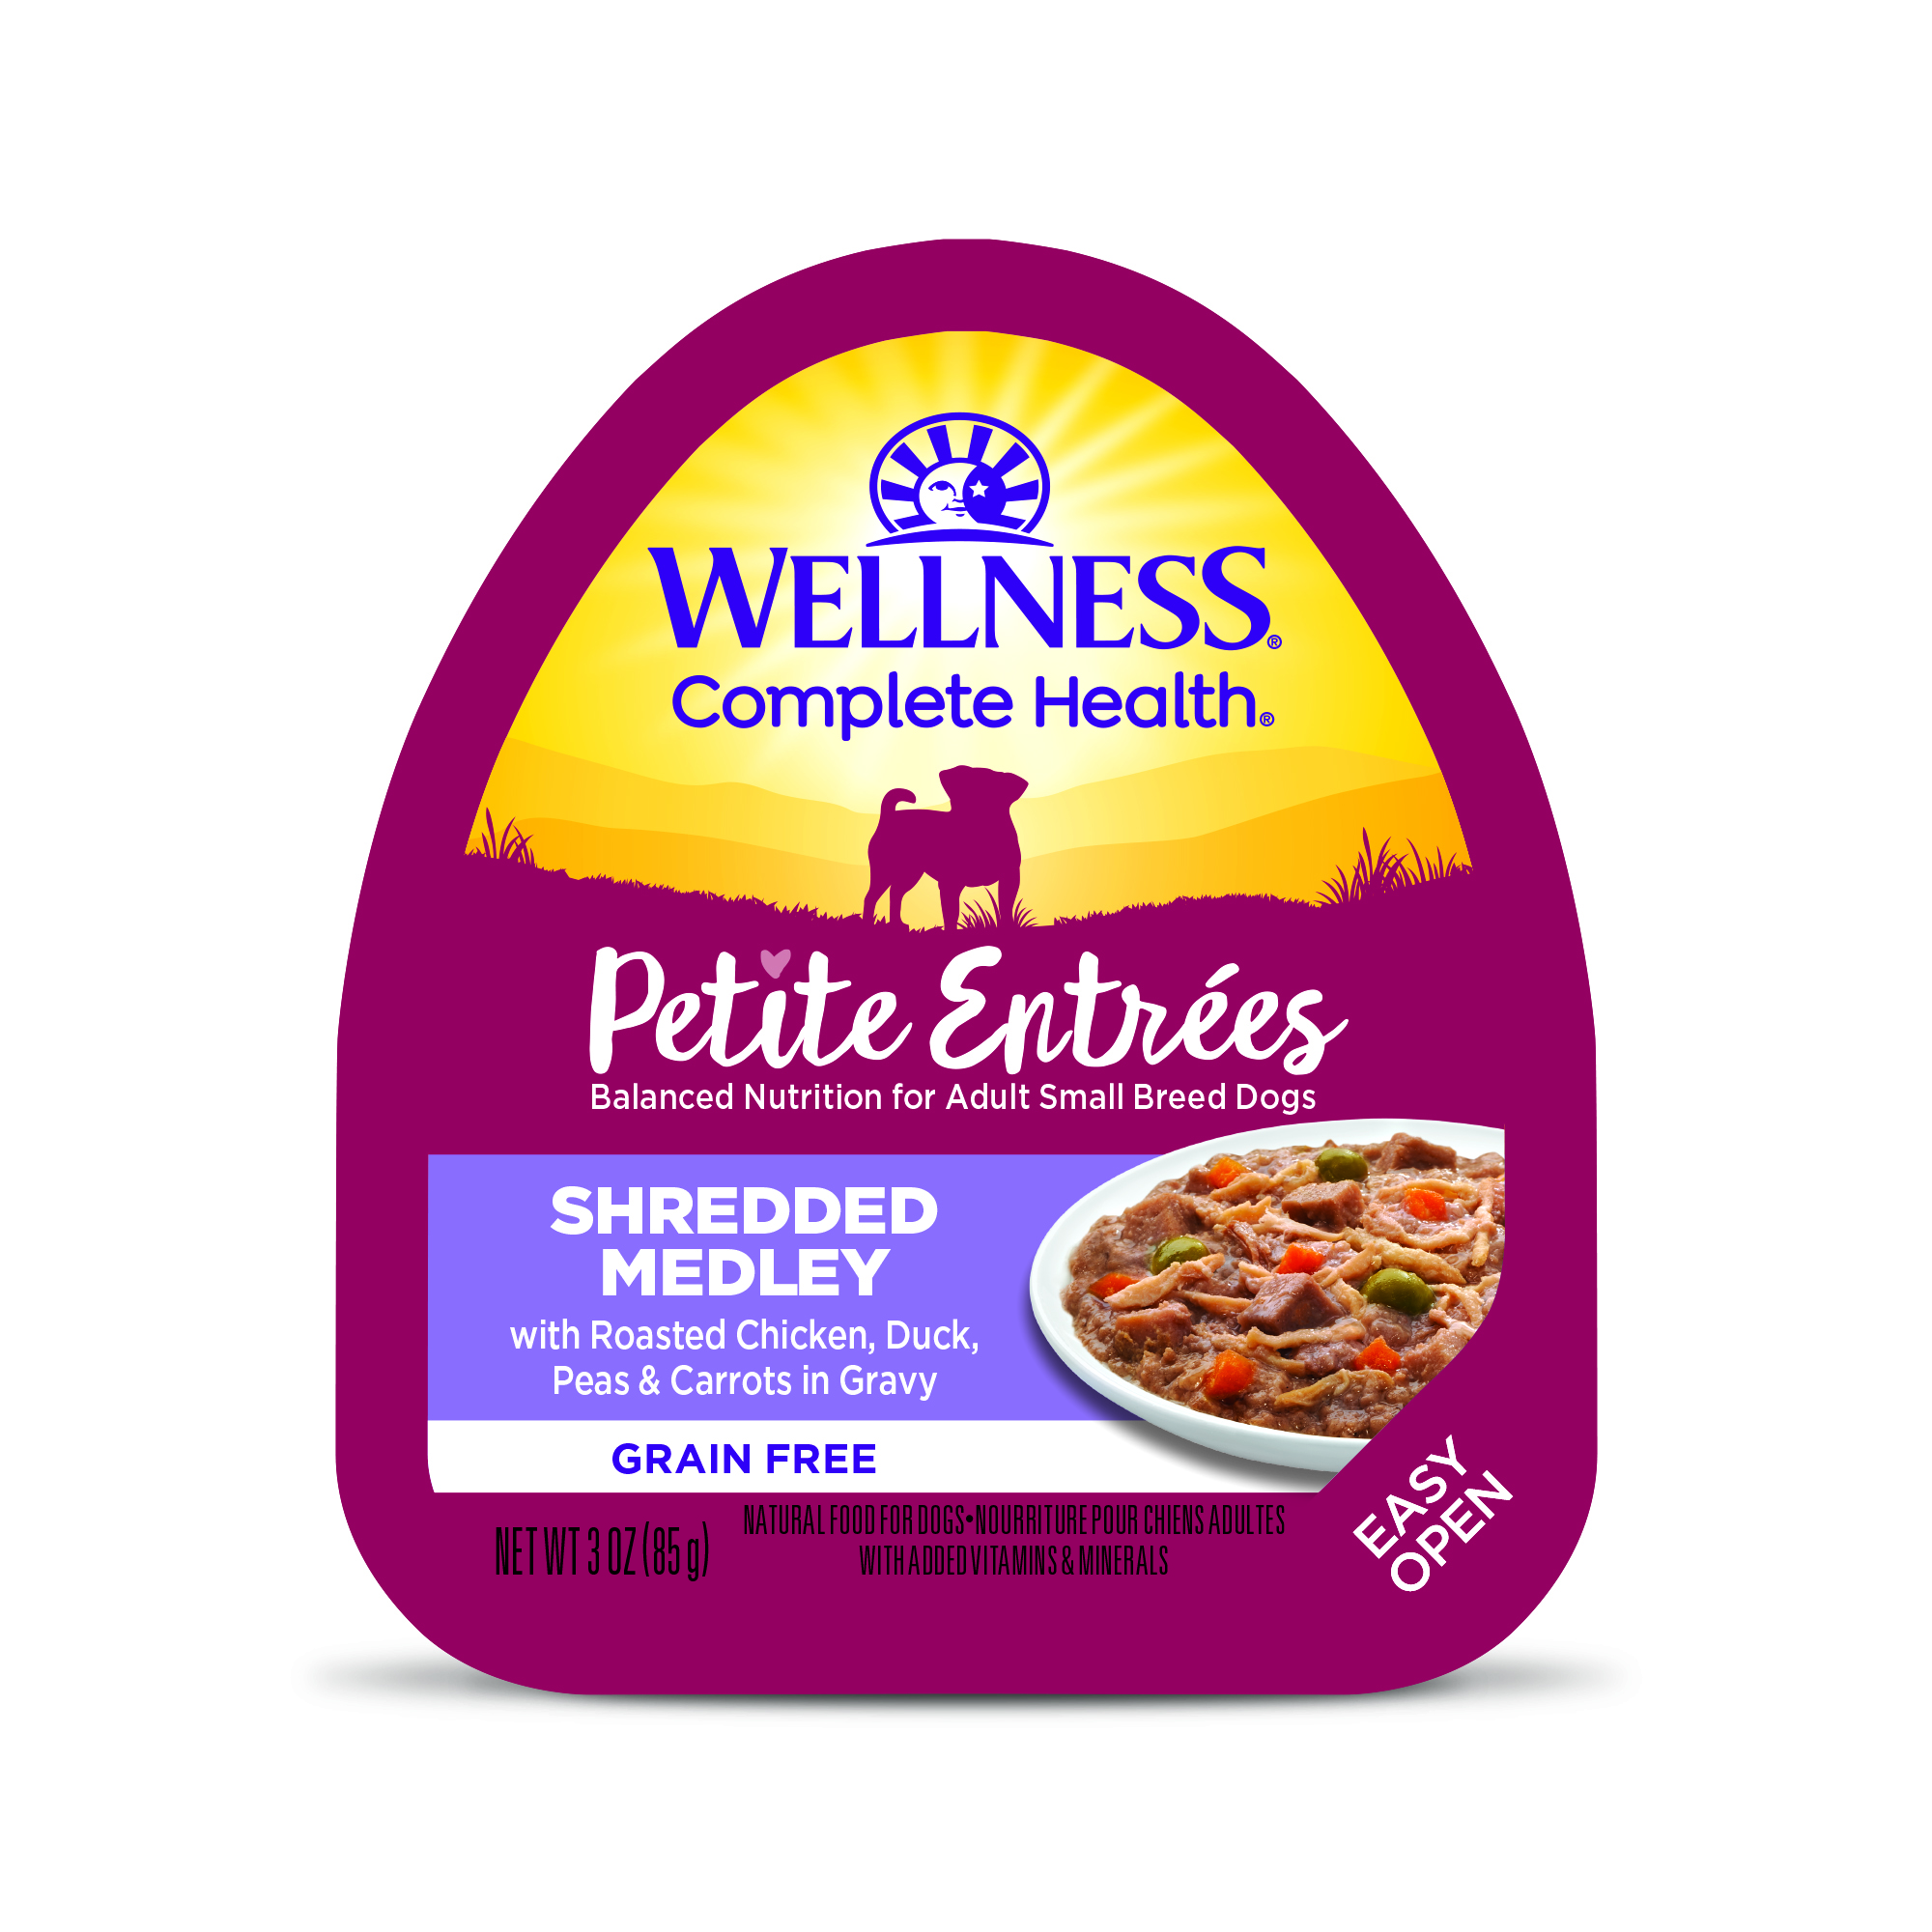 Wellness Complete Health Petite Entrées Shredded Medley Roasted Chicken, Duck, Peas & Carrots